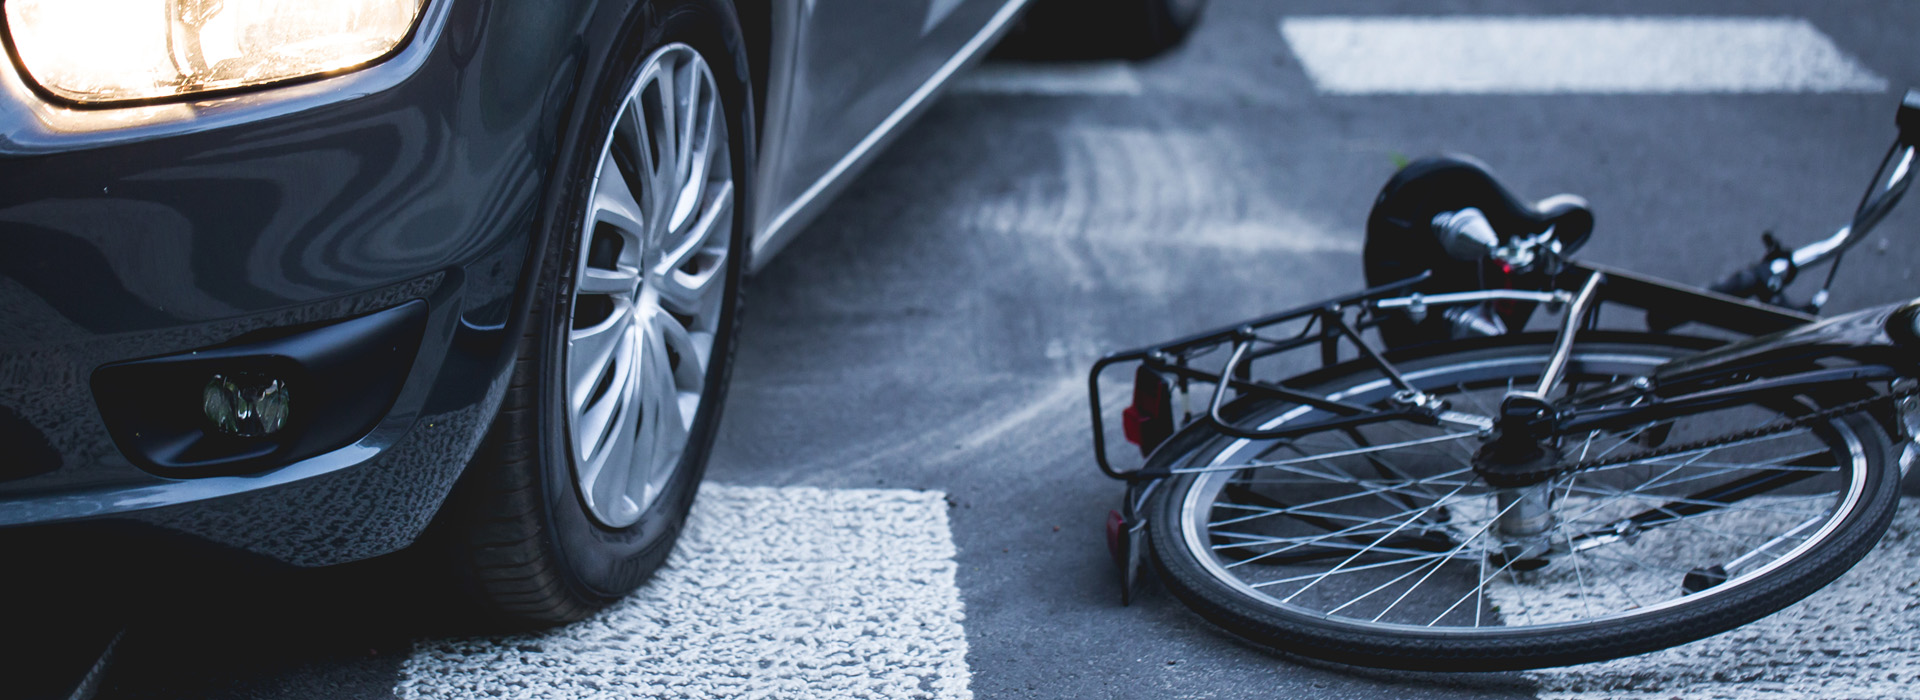 Bicyclist Killed in Hit-and-Run